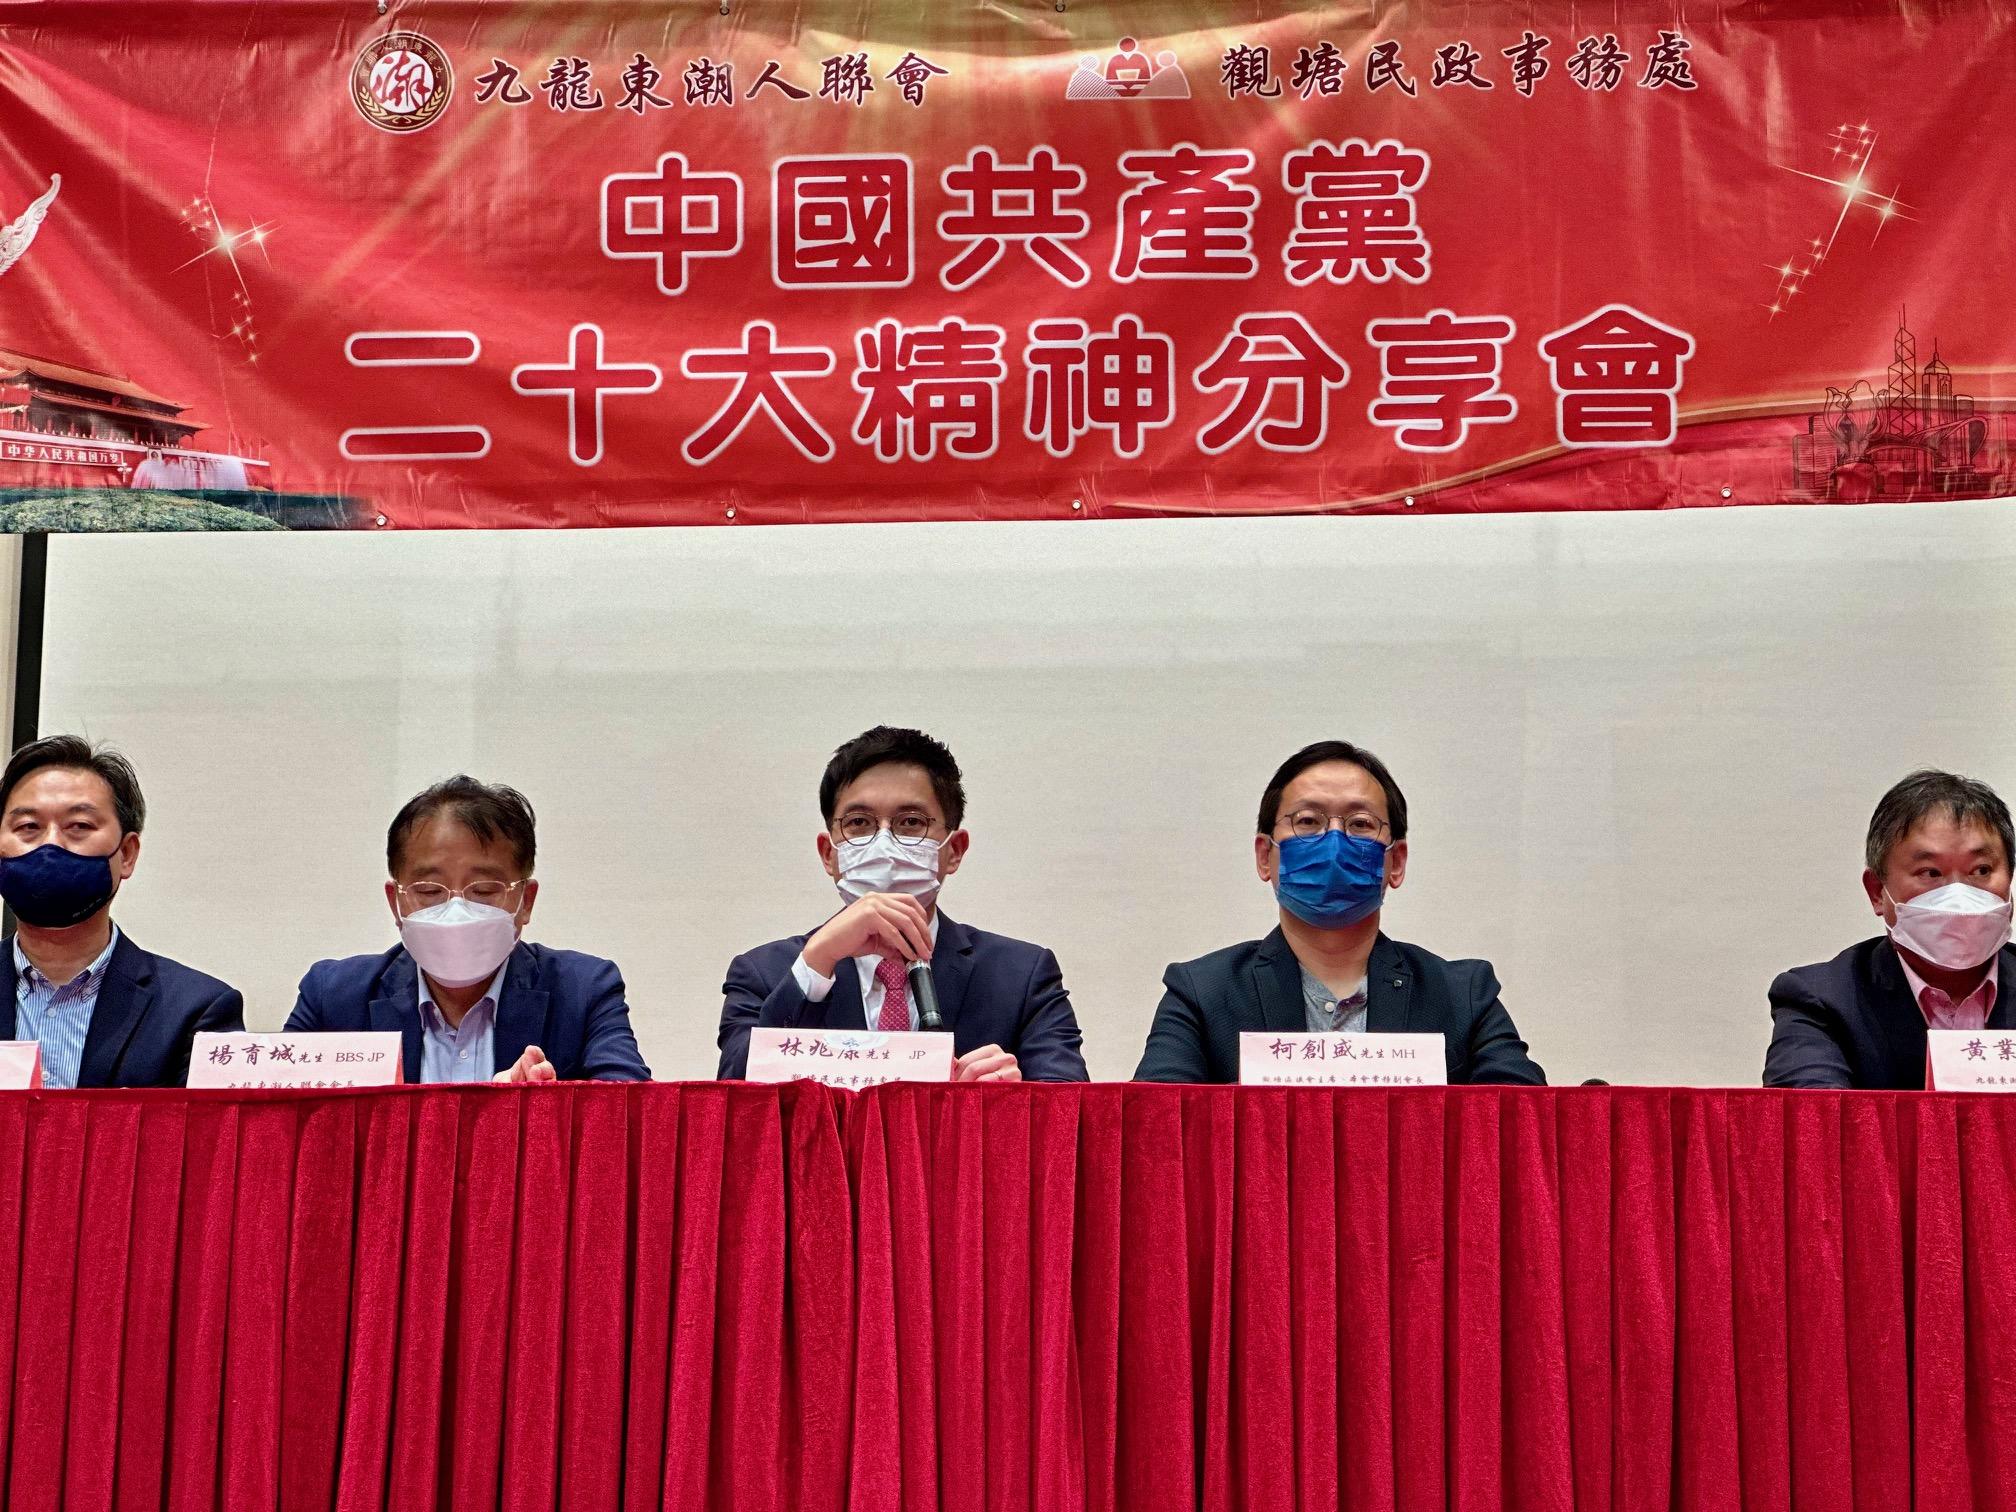 The Kwun Tong District Office, together with the Kowloon East Chaoren Association, held a session on "Spirit of the 20th National Congress of the CPC" at Kai Yip Community Hall on November 4. Photo shows the Vice-chairman of the KECA, Mr Ng Kwong-lam (first left); the Chairman of the KECA, Mr Yeung Yuk-sing (second left); the District Officer (Kwun Tong), Mr Andy Lam (centre); and the Chairman of the Kwun Tong District Council, Mr Wilson Or (second right), sharing at the session. 